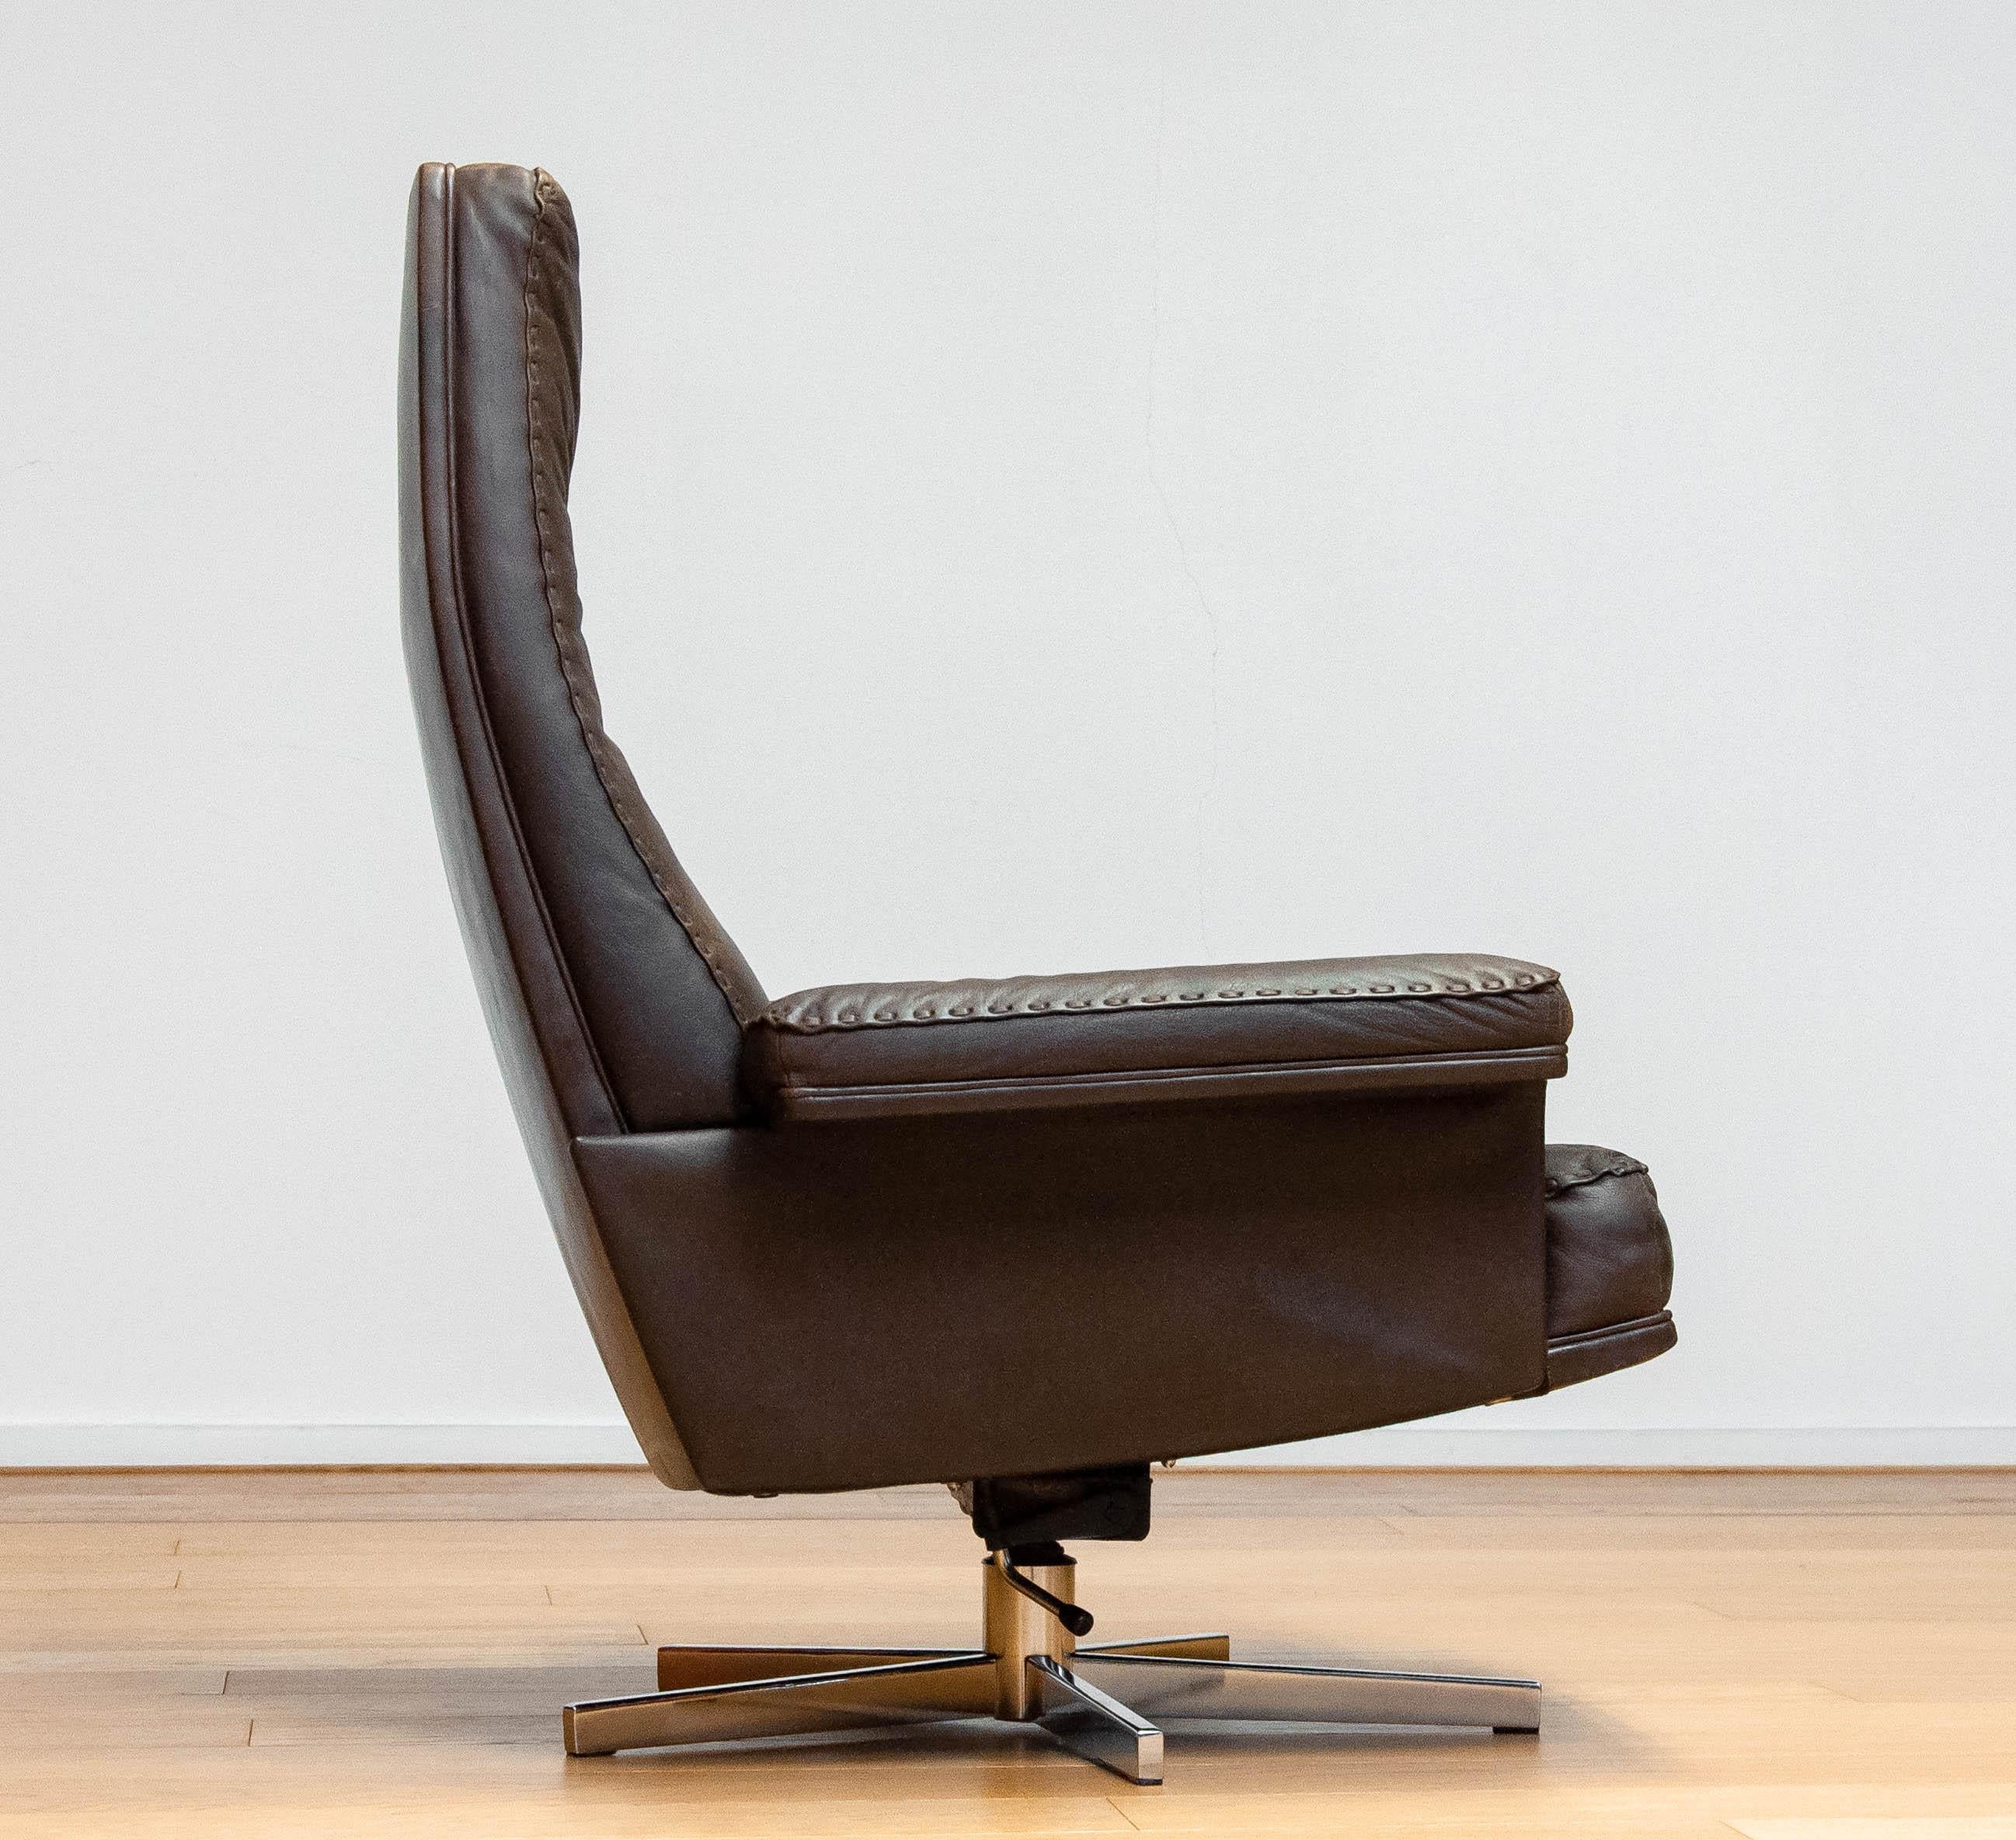 1970s Handstitched Brown Leather Swivel Chair with Chrome Base by De Sede DS-35 In Good Condition In Silvolde, Gelderland